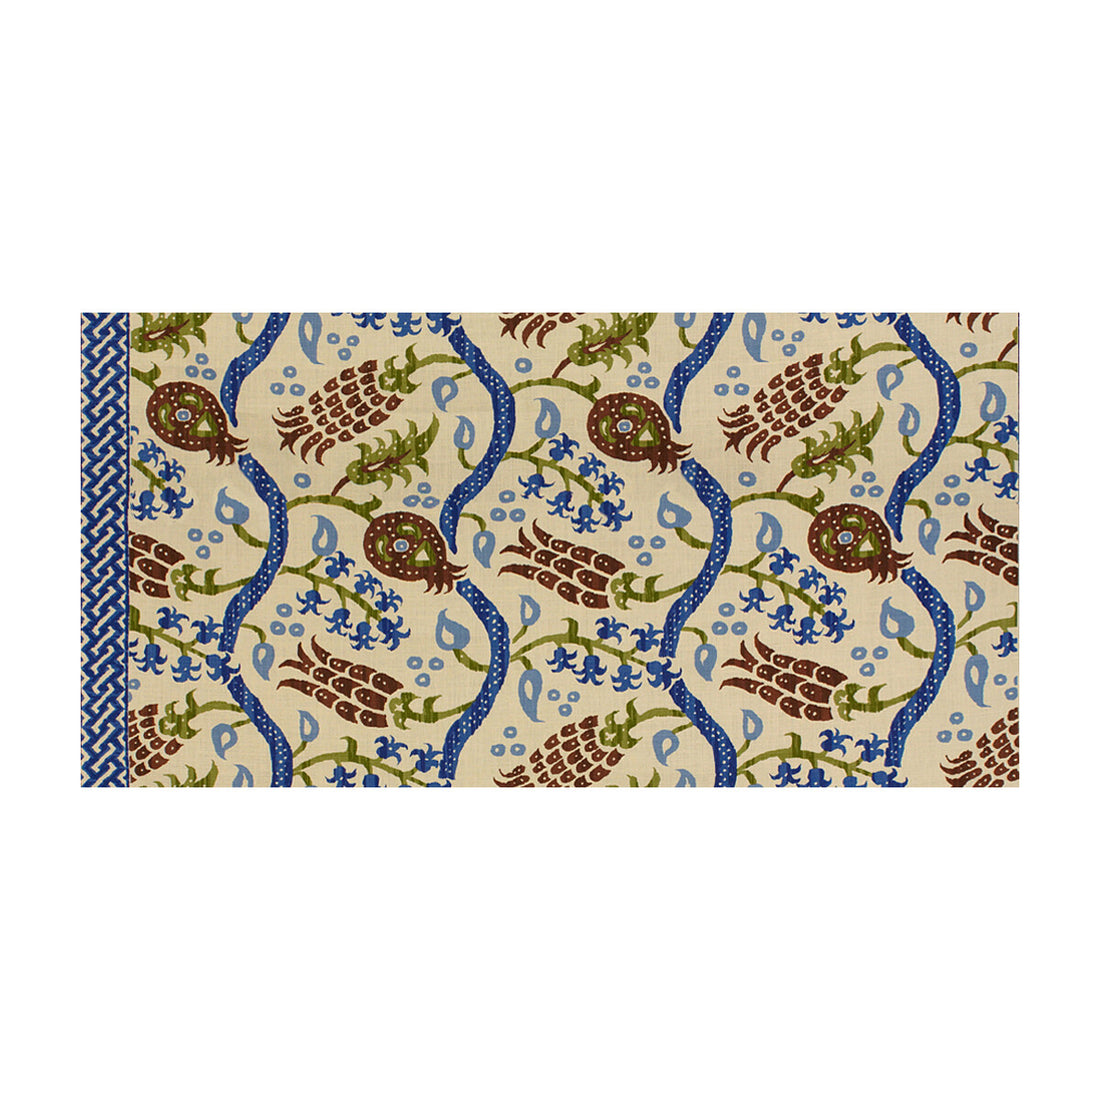 Nisiotiko Linen Print fabric in nutmeg/canton blue color - pattern BR-700019.832.0 - by Brunschwig &amp; Fils in the Les Alizes collection